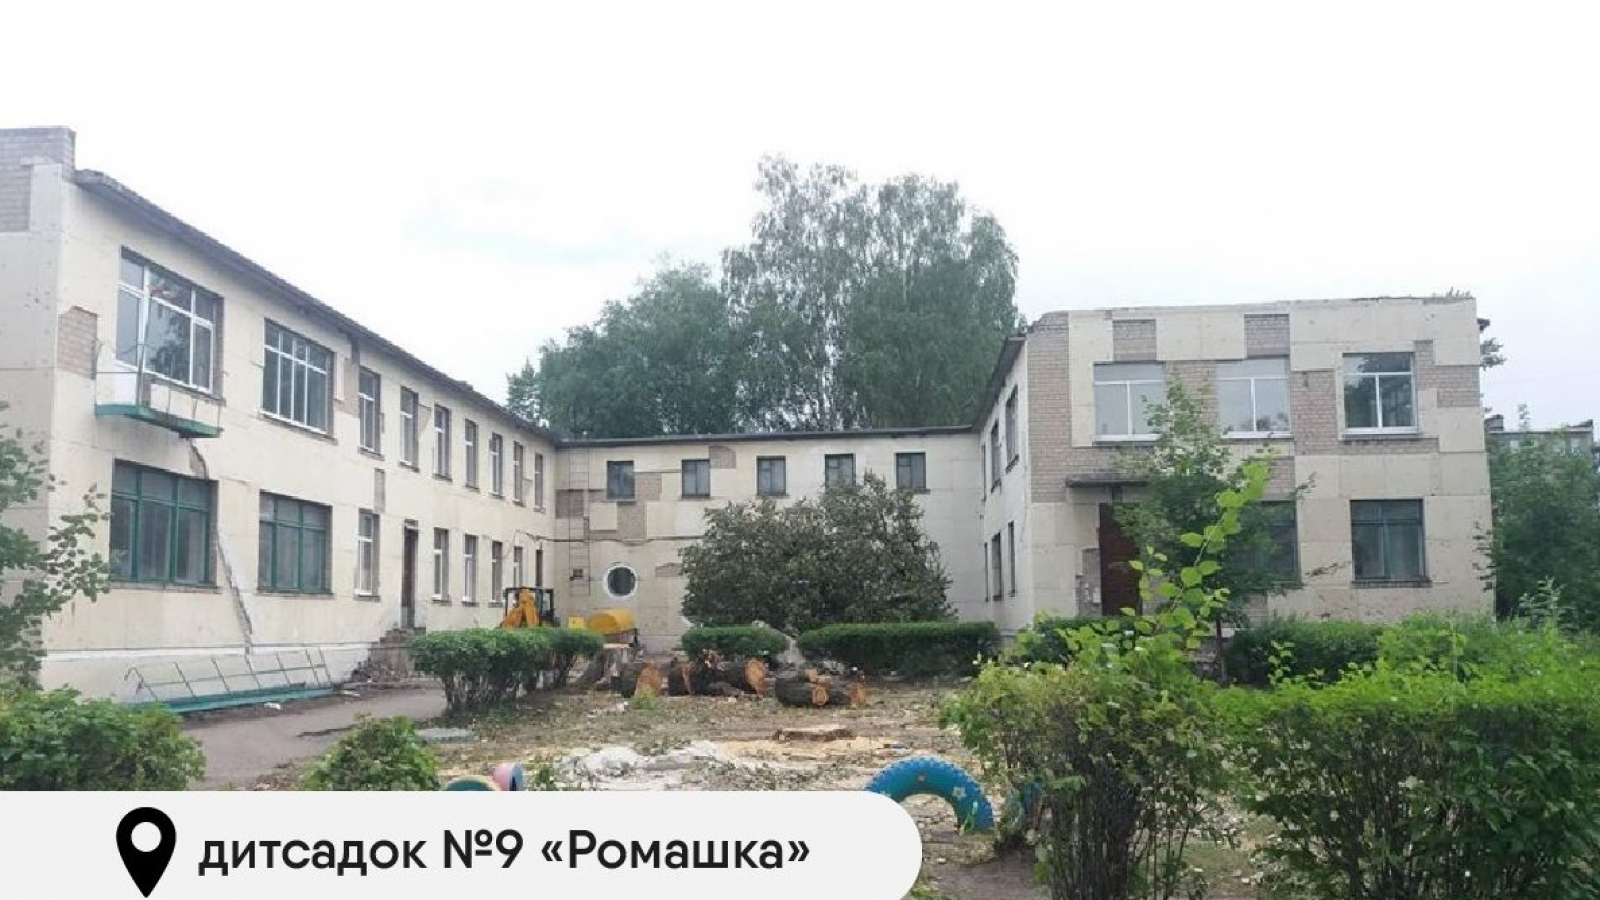 Ukraine: Another preschool in Donetsk region to become more energy efficient thanks to EU 